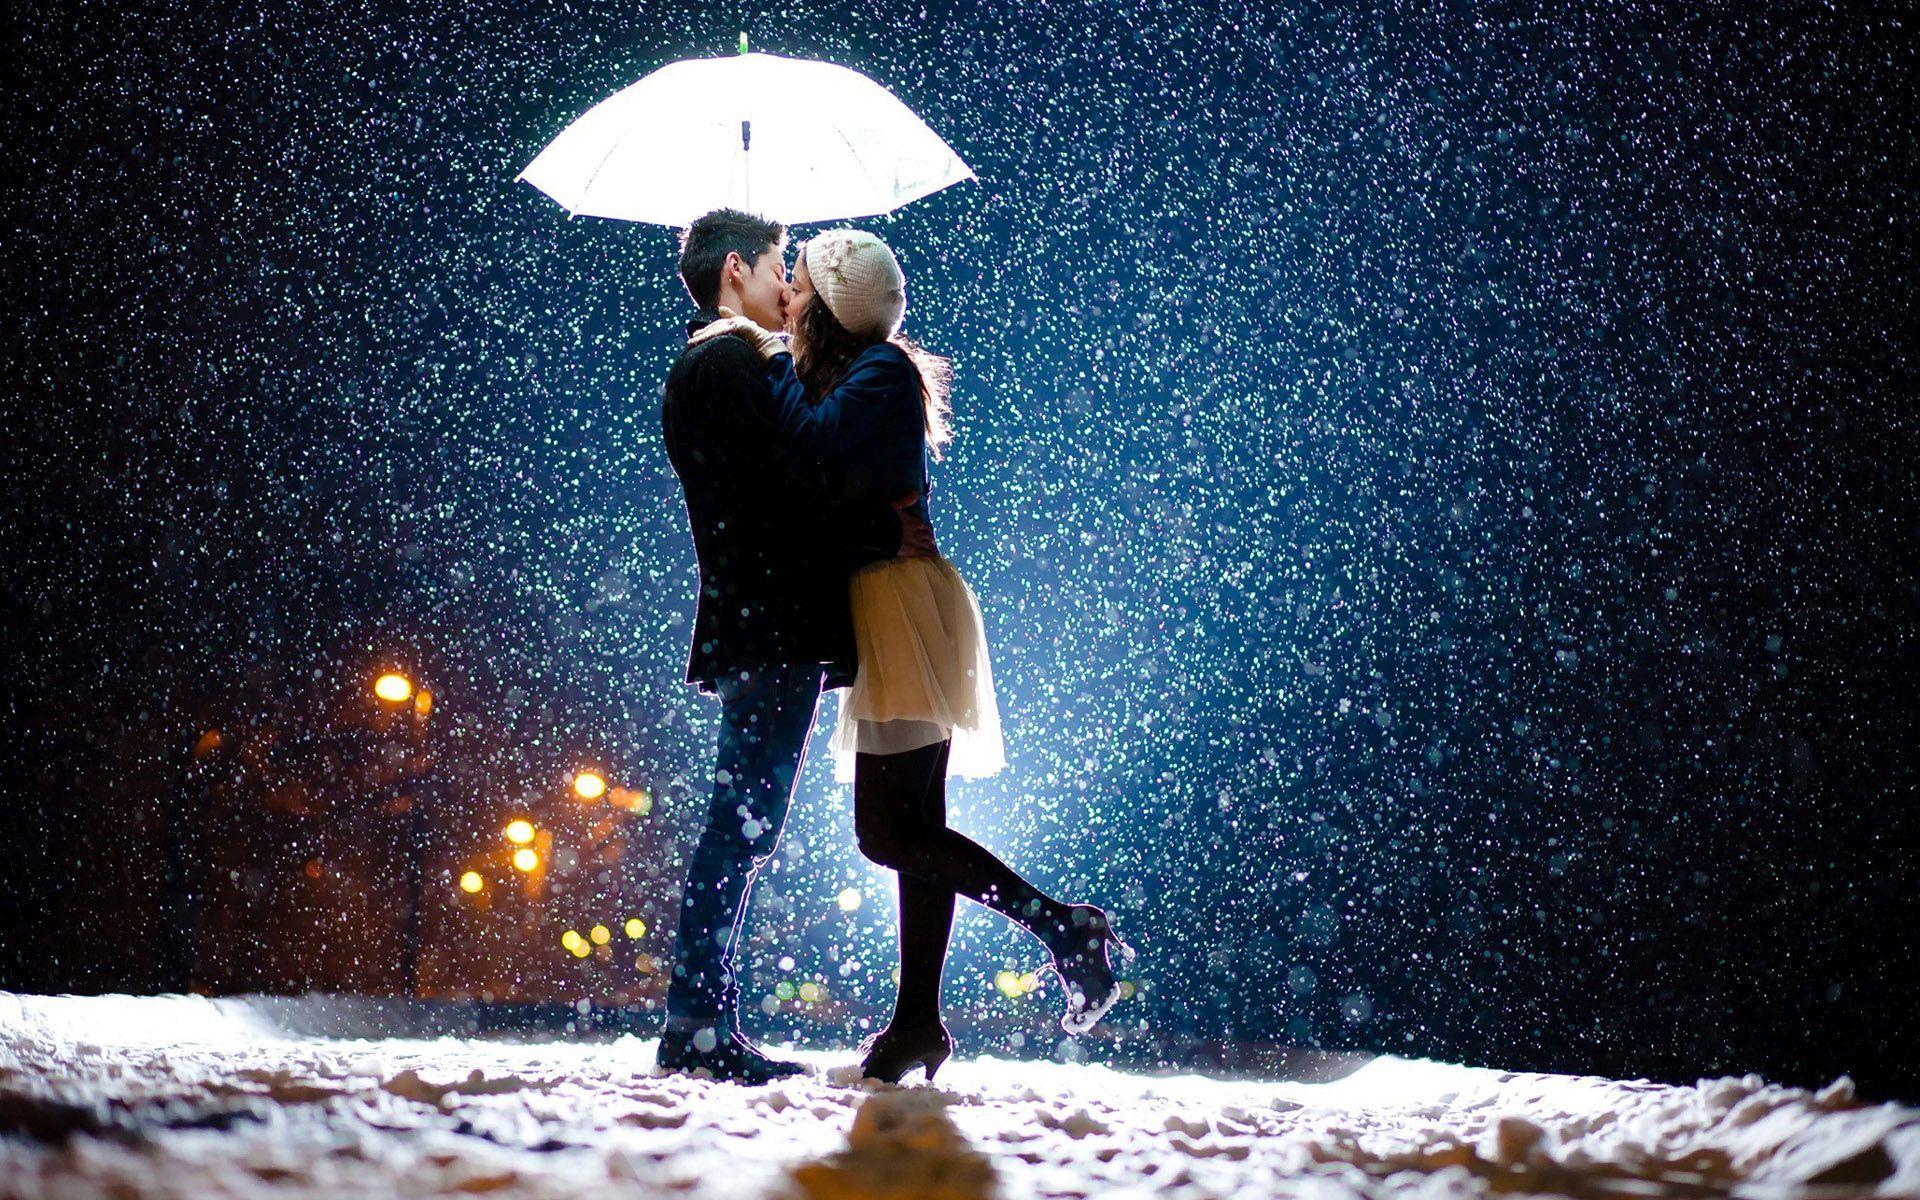 Kissing In The Snowfall - Romantic Love Couple In Rain Quotes - 1920x1200  Wallpaper 